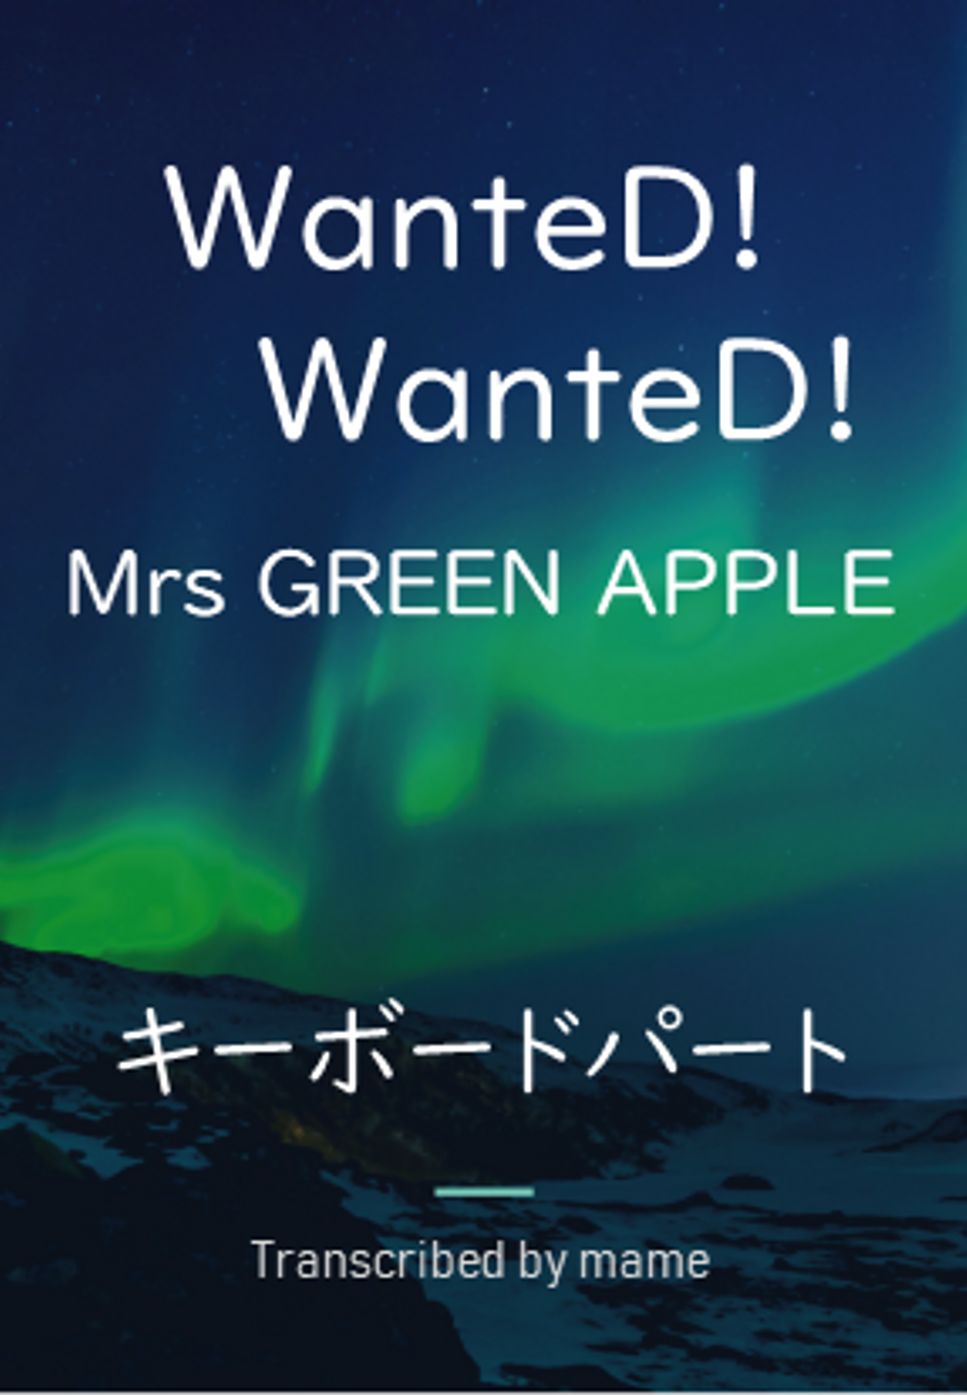 Mrs GREEN APPLE - WanteD! WanteD! (キーボードパート) by mame